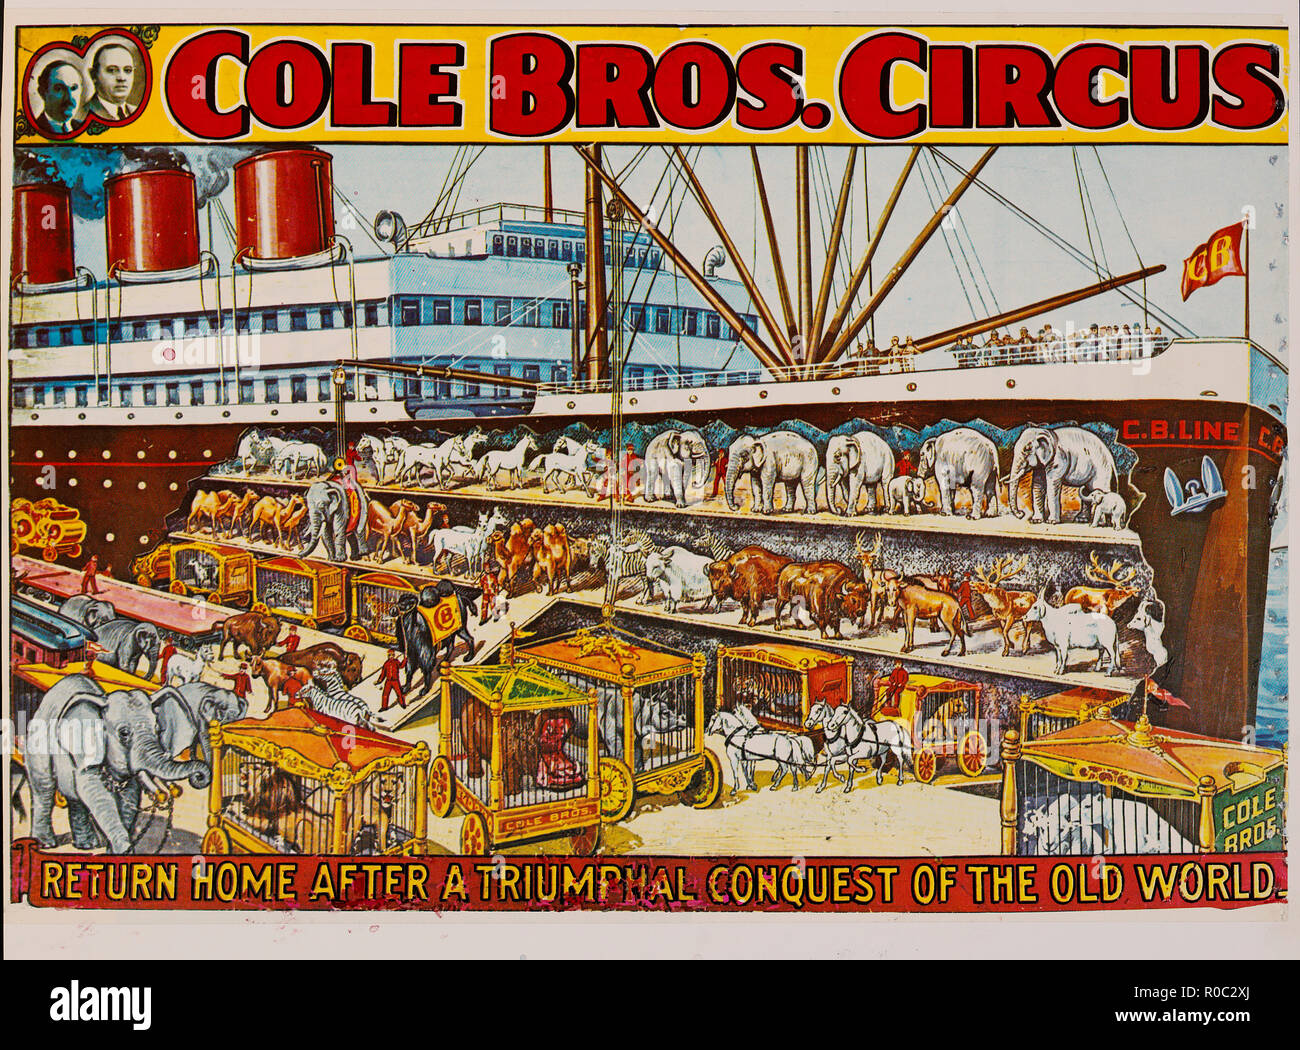 Cole Bros. Circus, Return Home after a Triumphant Conquest of the Old World, Circus Poster, Lithograph, 1930's Stock Photo